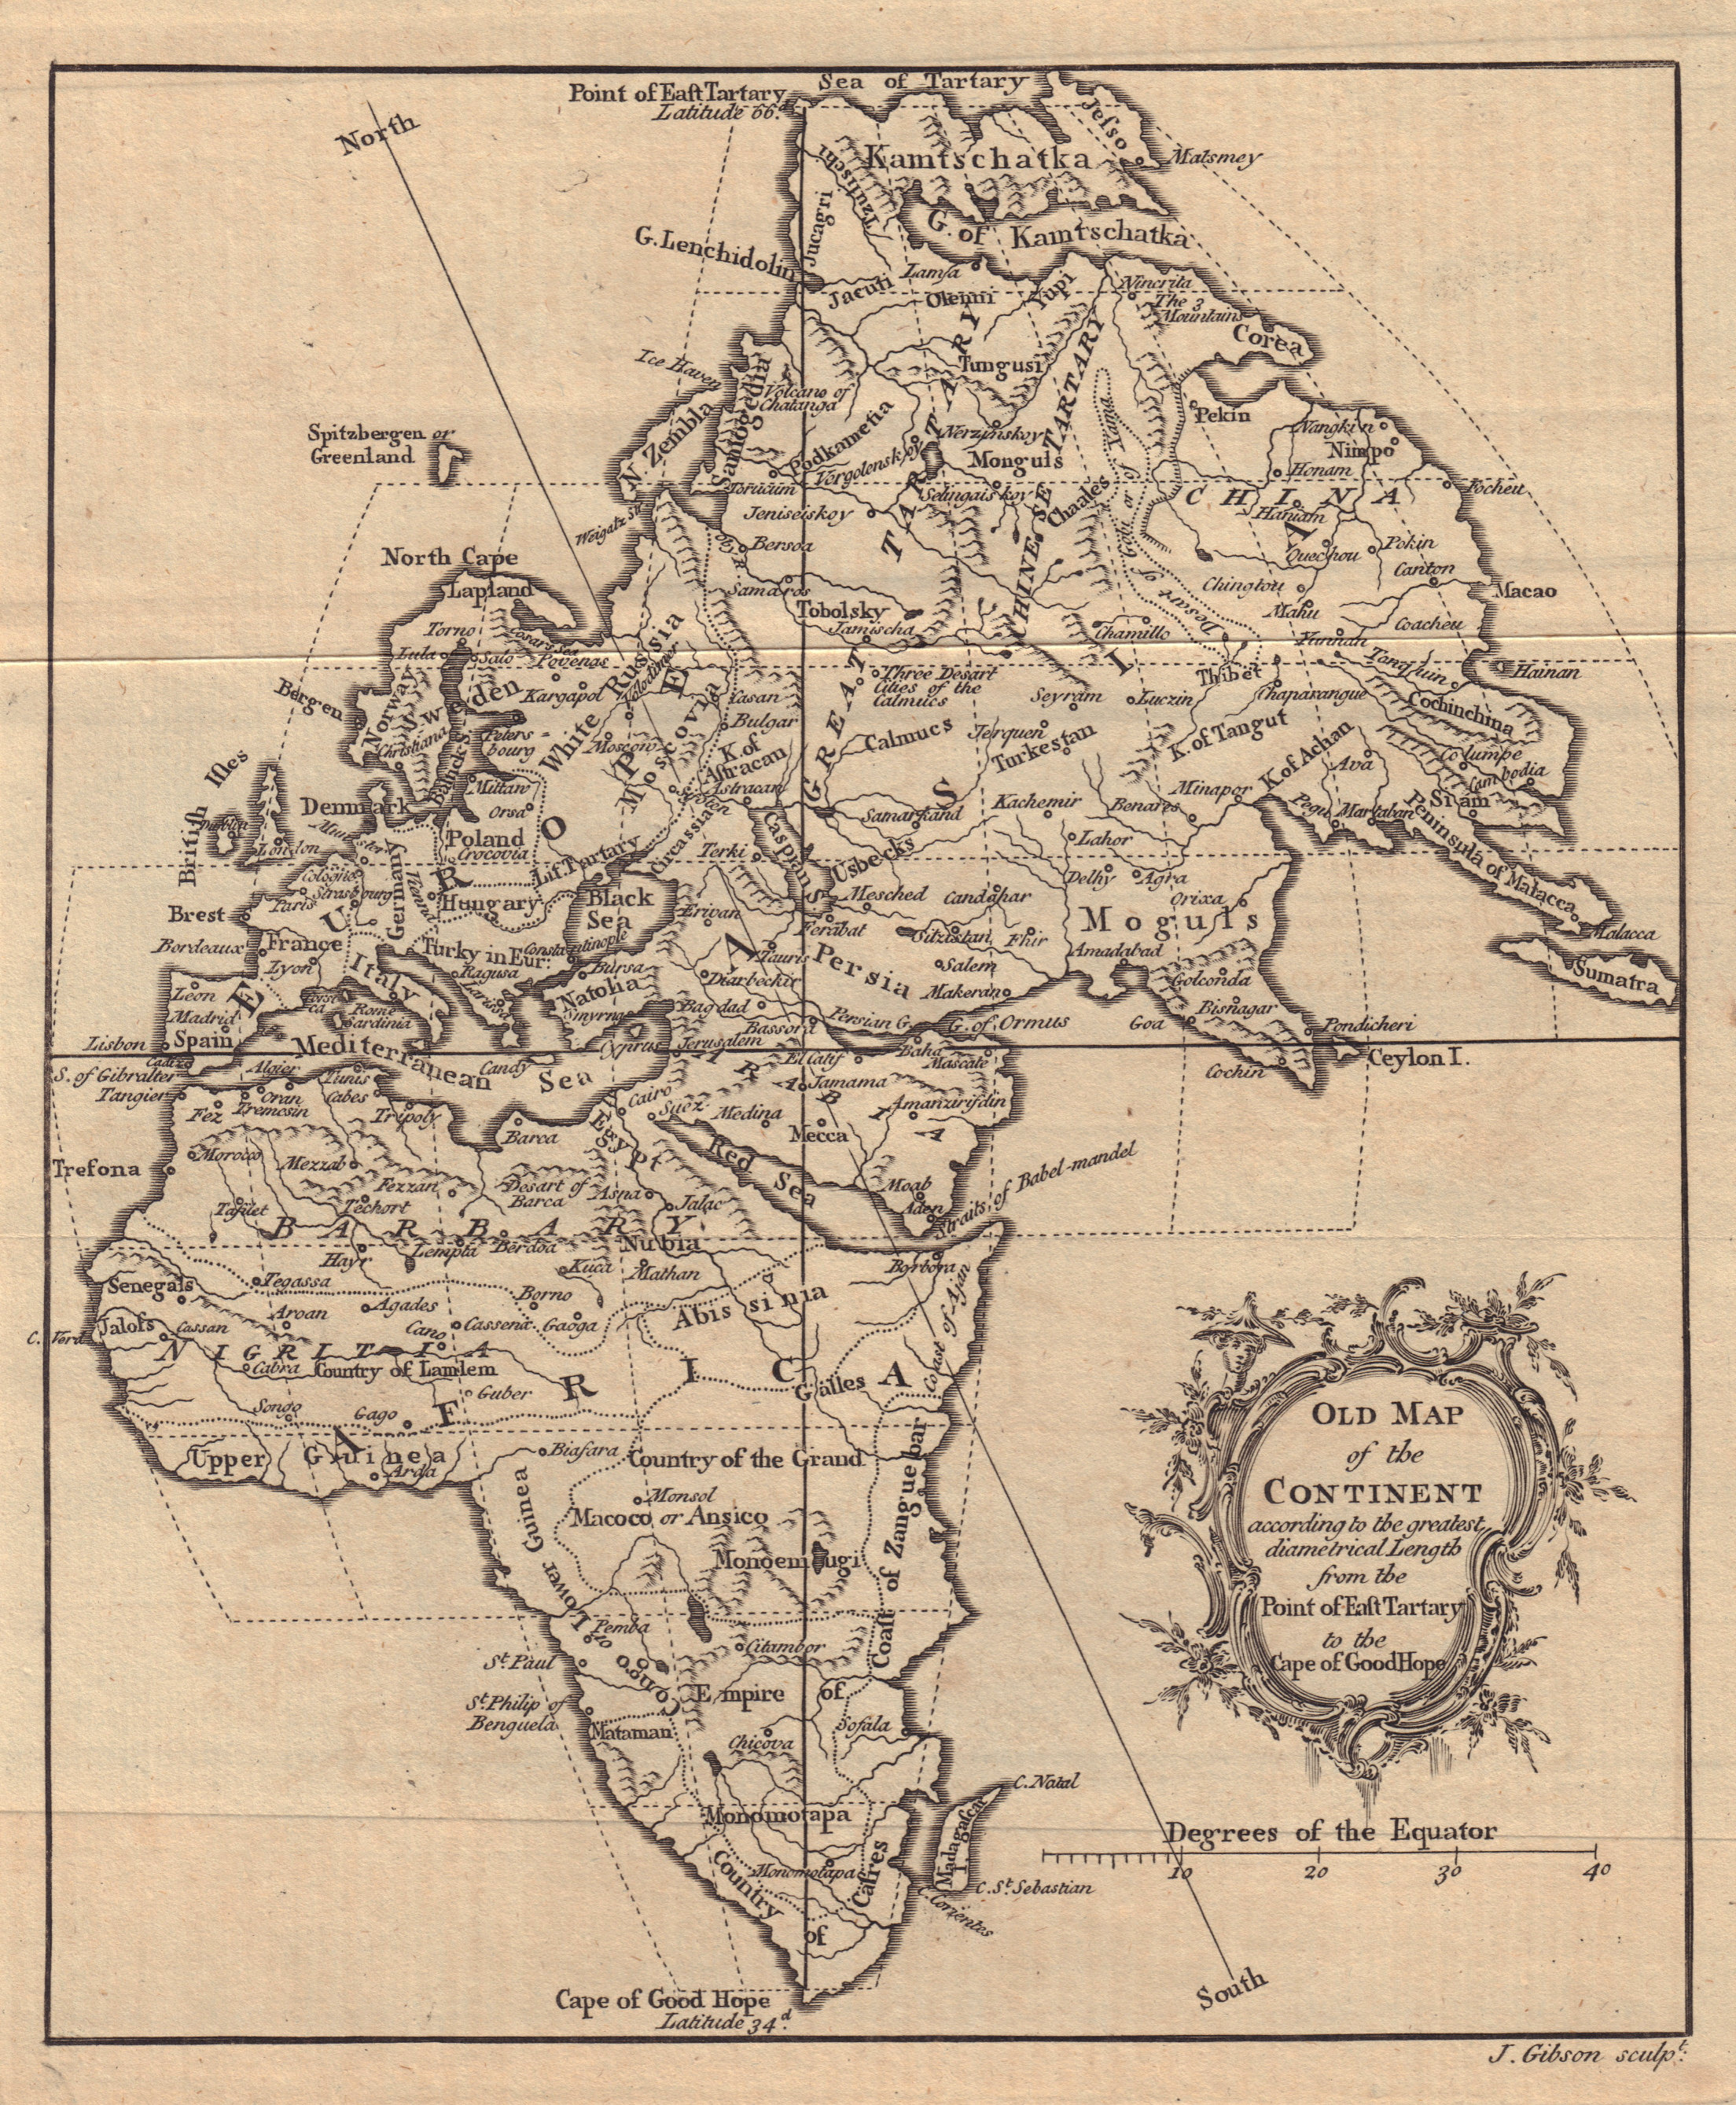 Associate Product Old Map of the Continent… Europe Africa Asia Eastern Hemisphere. GIBSON 1758